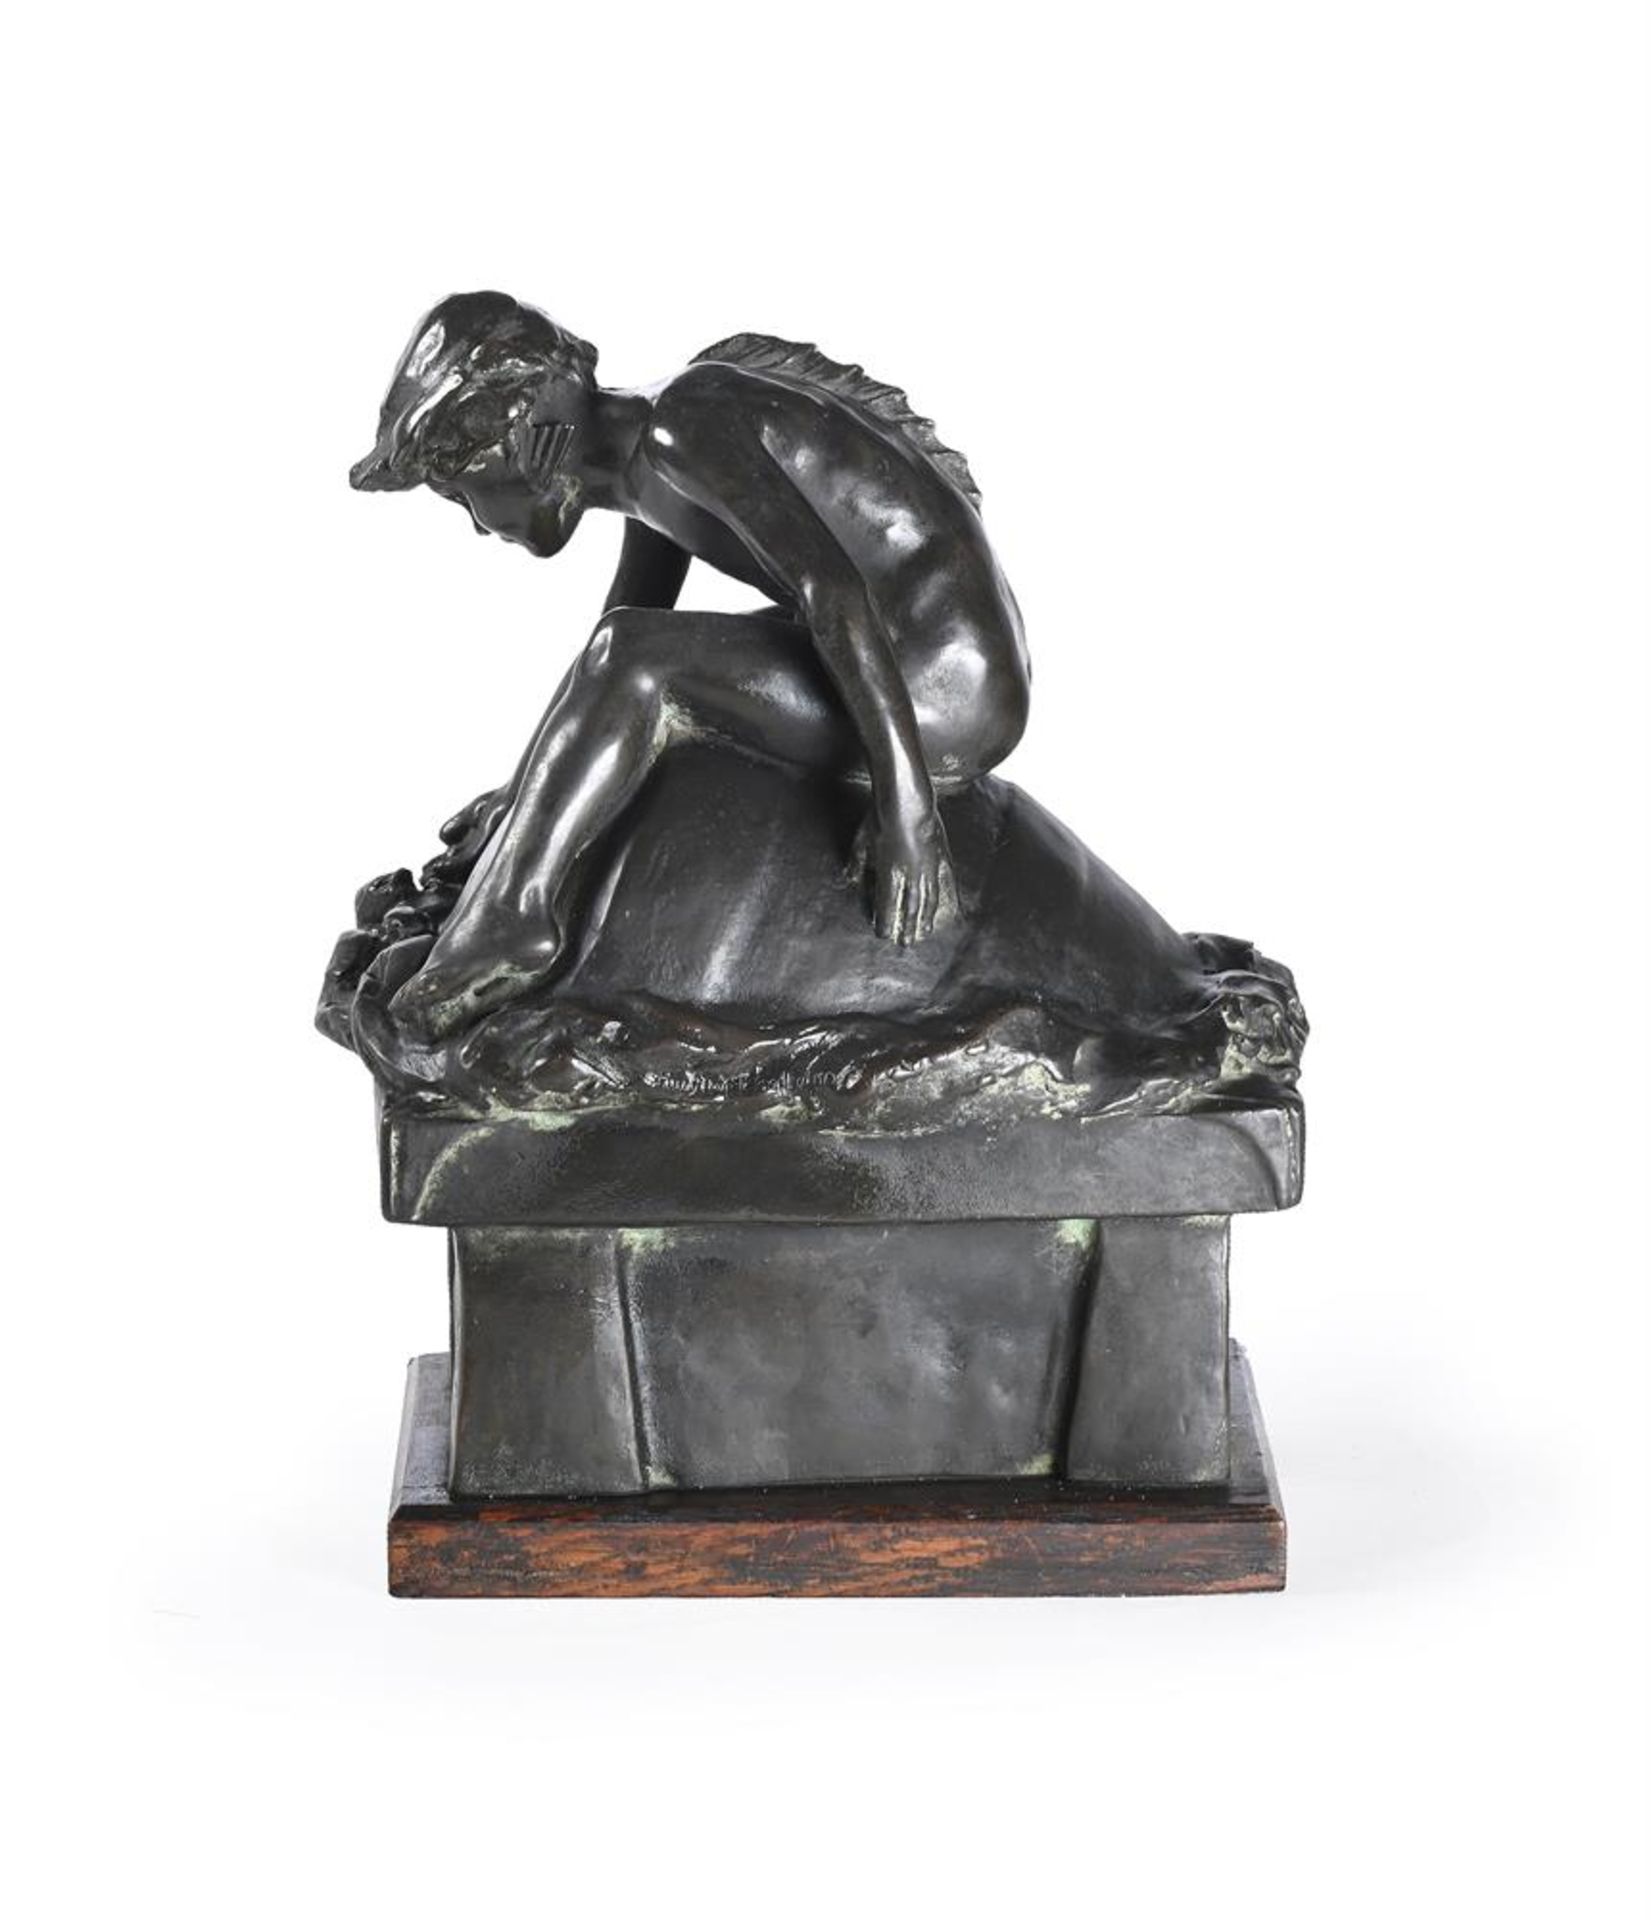 RUBY LEVICK BAILEY (WELSH, 1871-1940), A BRONZE GROUP OF A MERCHILD ON A FLOATING BARREL, DATED 1912 - Bild 3 aus 4